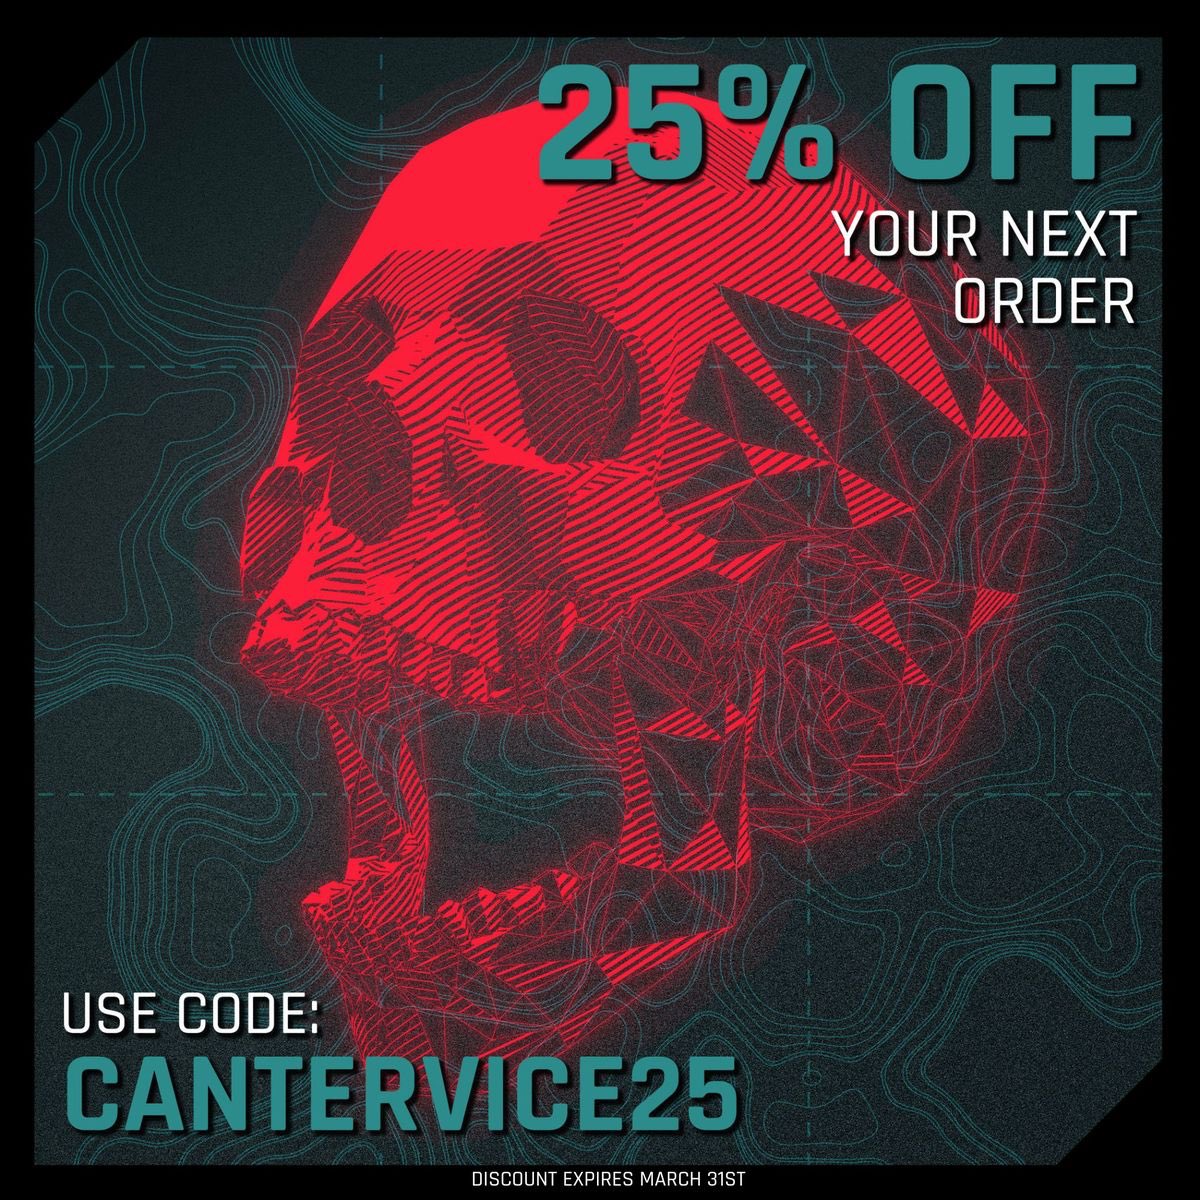 ATTENTION: [MERCH SALE INITIATED]⁣ Use code: CANTERVICE25⁣ Now through March 31st >>> ⁣ fixtstore.com/cantervice